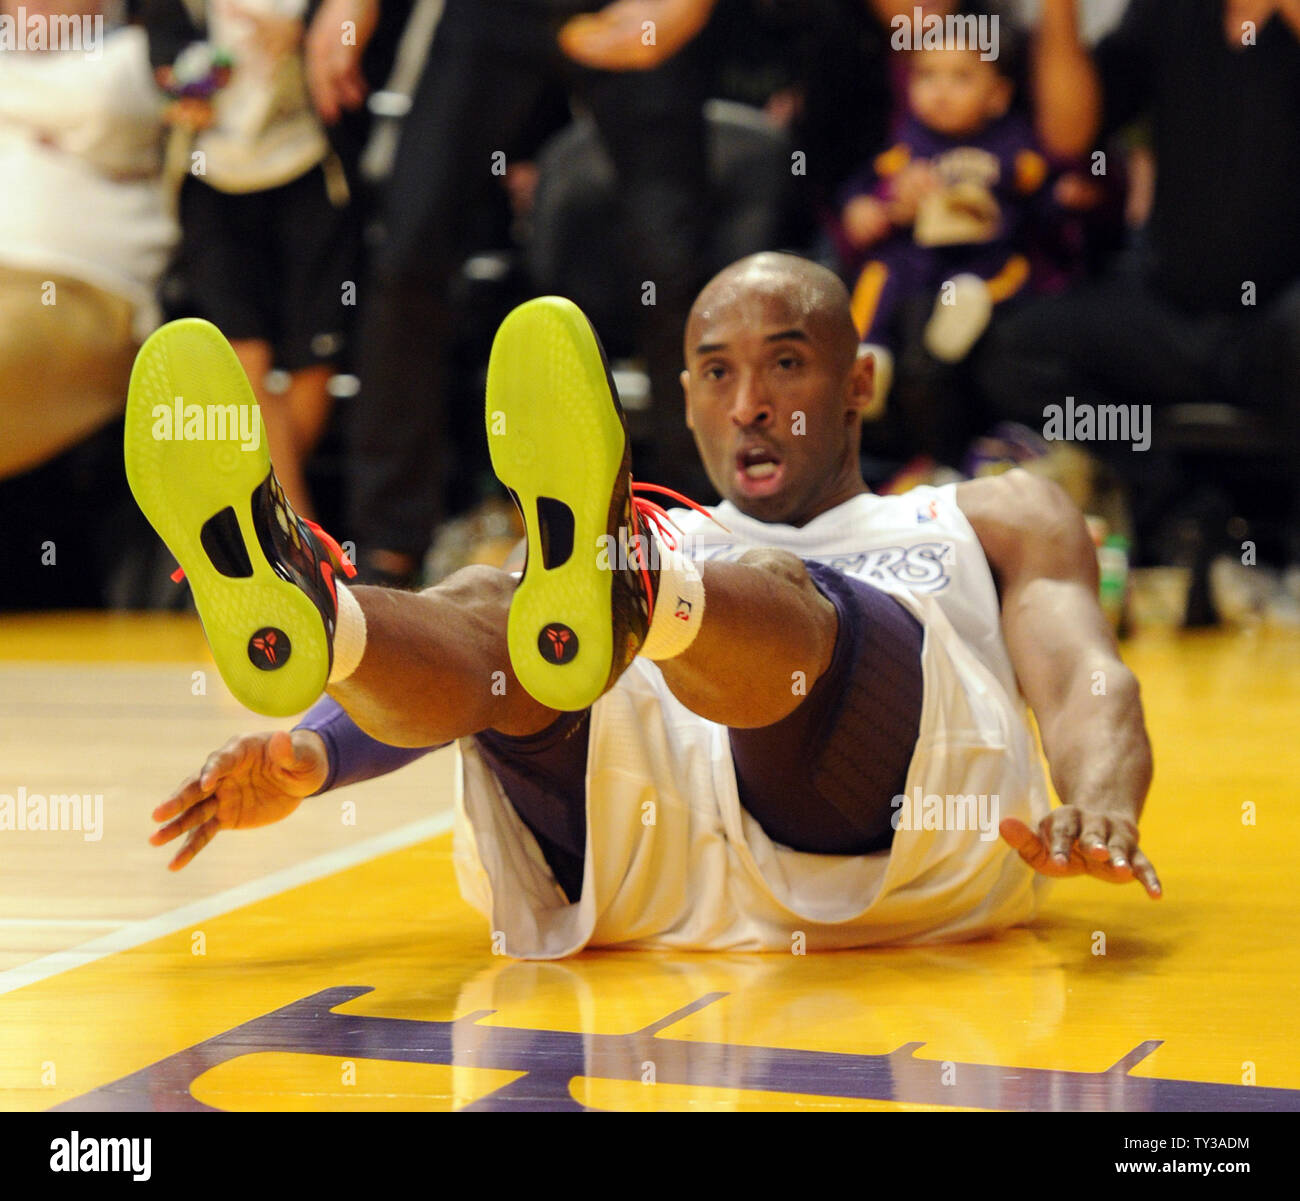 Los Angeles Lakers shooting guard Kobe Bryant lands on the court after making a basket against the New York Knicks in the first half of an NBA basketball game in Los Angeles on December 25, 2012.    UPI/Lori Shepler Stock Photo